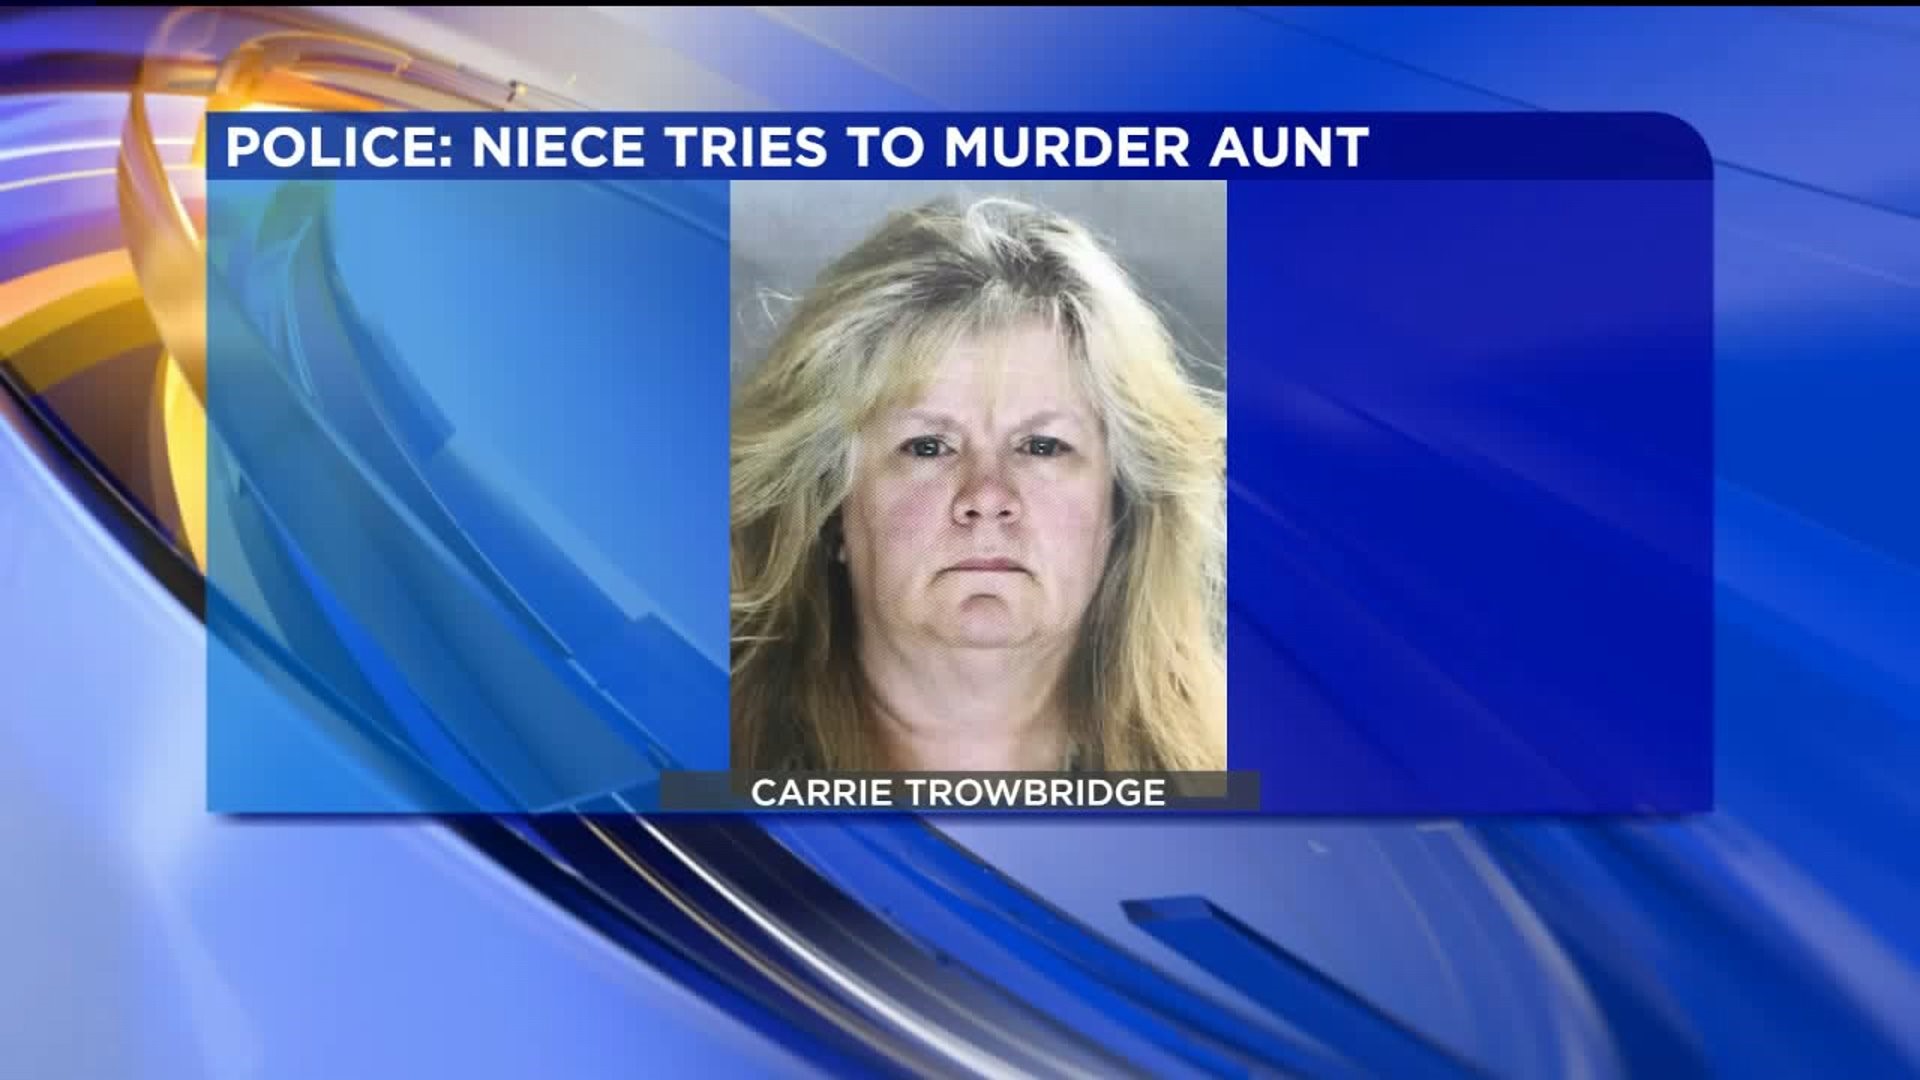 Woman Charged After Attempting to Kill Elderly Aunt